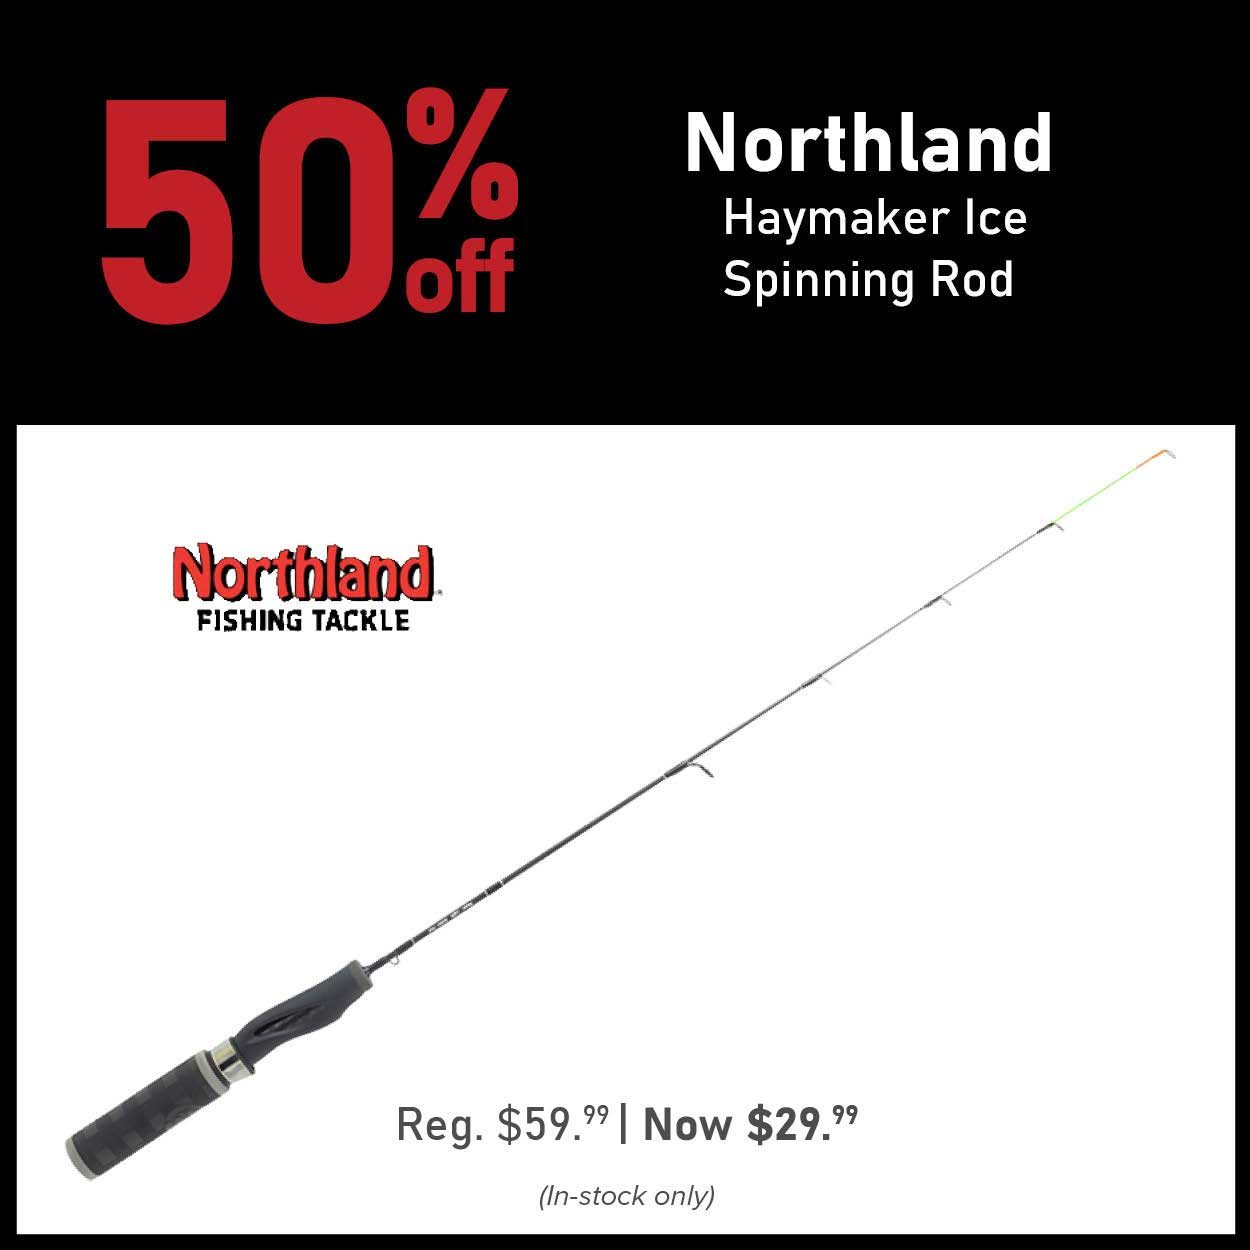 50% Off Northland Haymaker Ice Spinning Rod Reg. $59.99 | Now $29.99 (In-stock only)